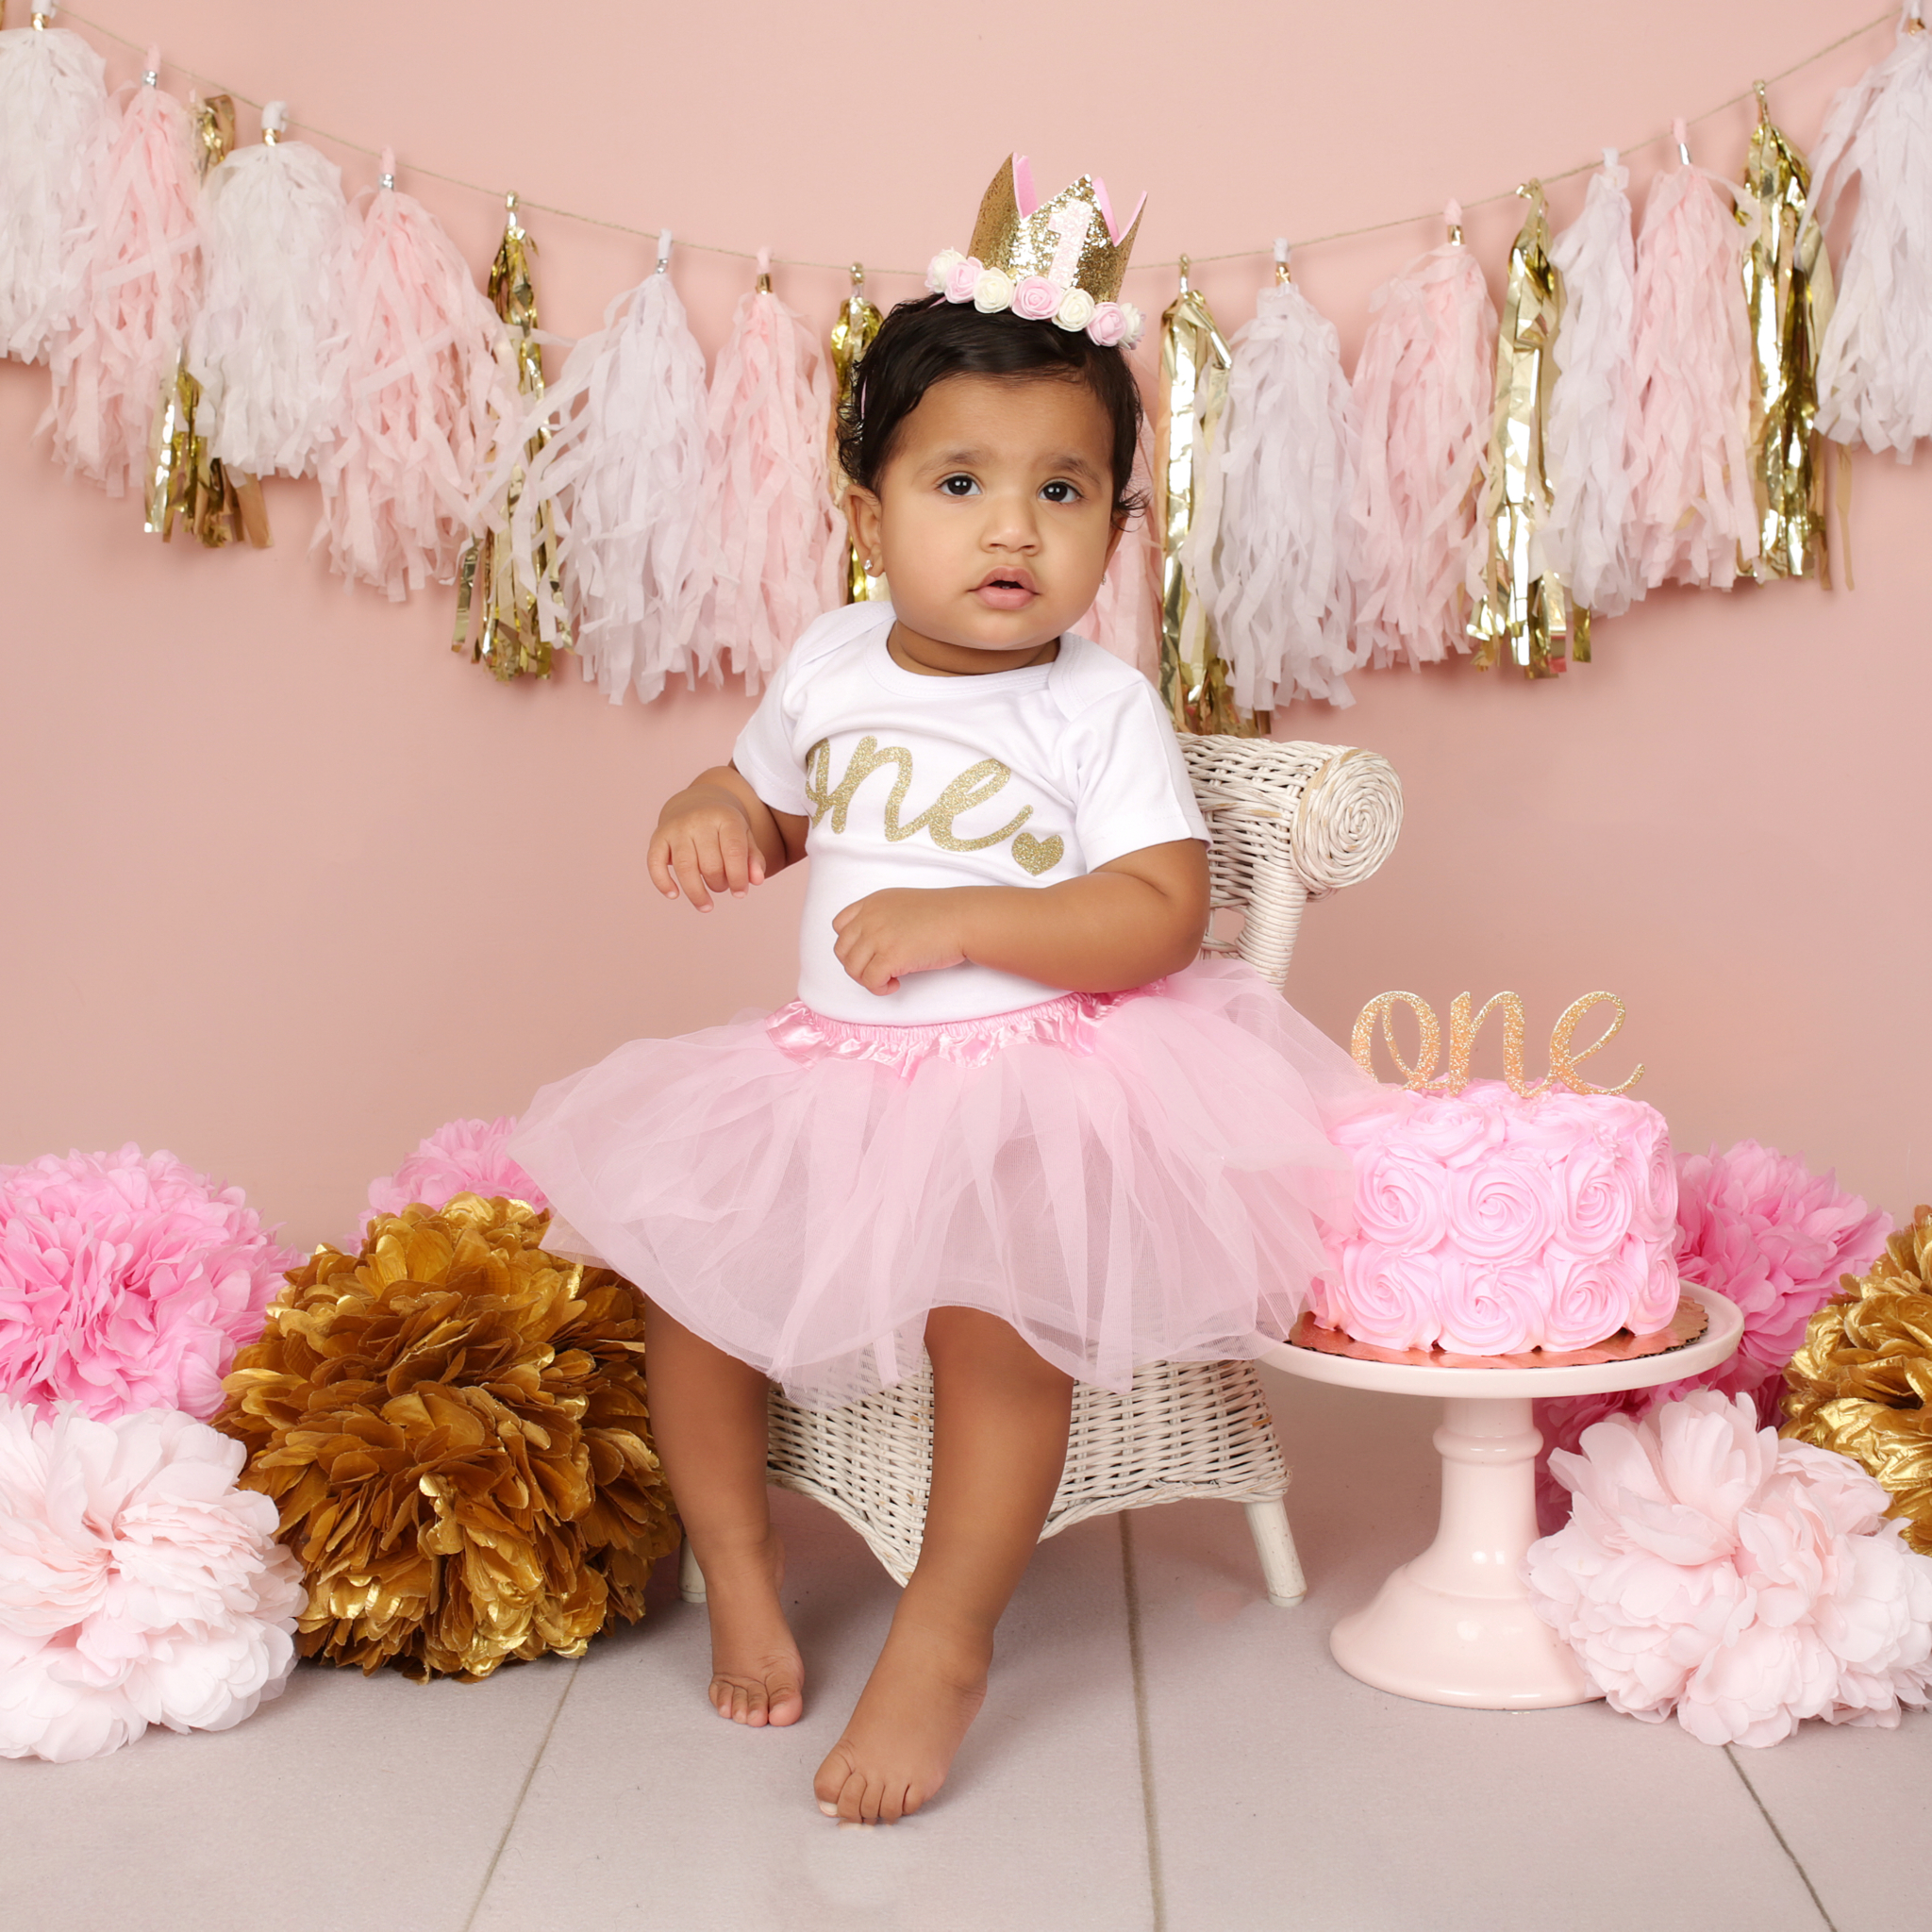 Fringe Banner & Pink & Gold Poofs w/White Wicker Chair On Pink